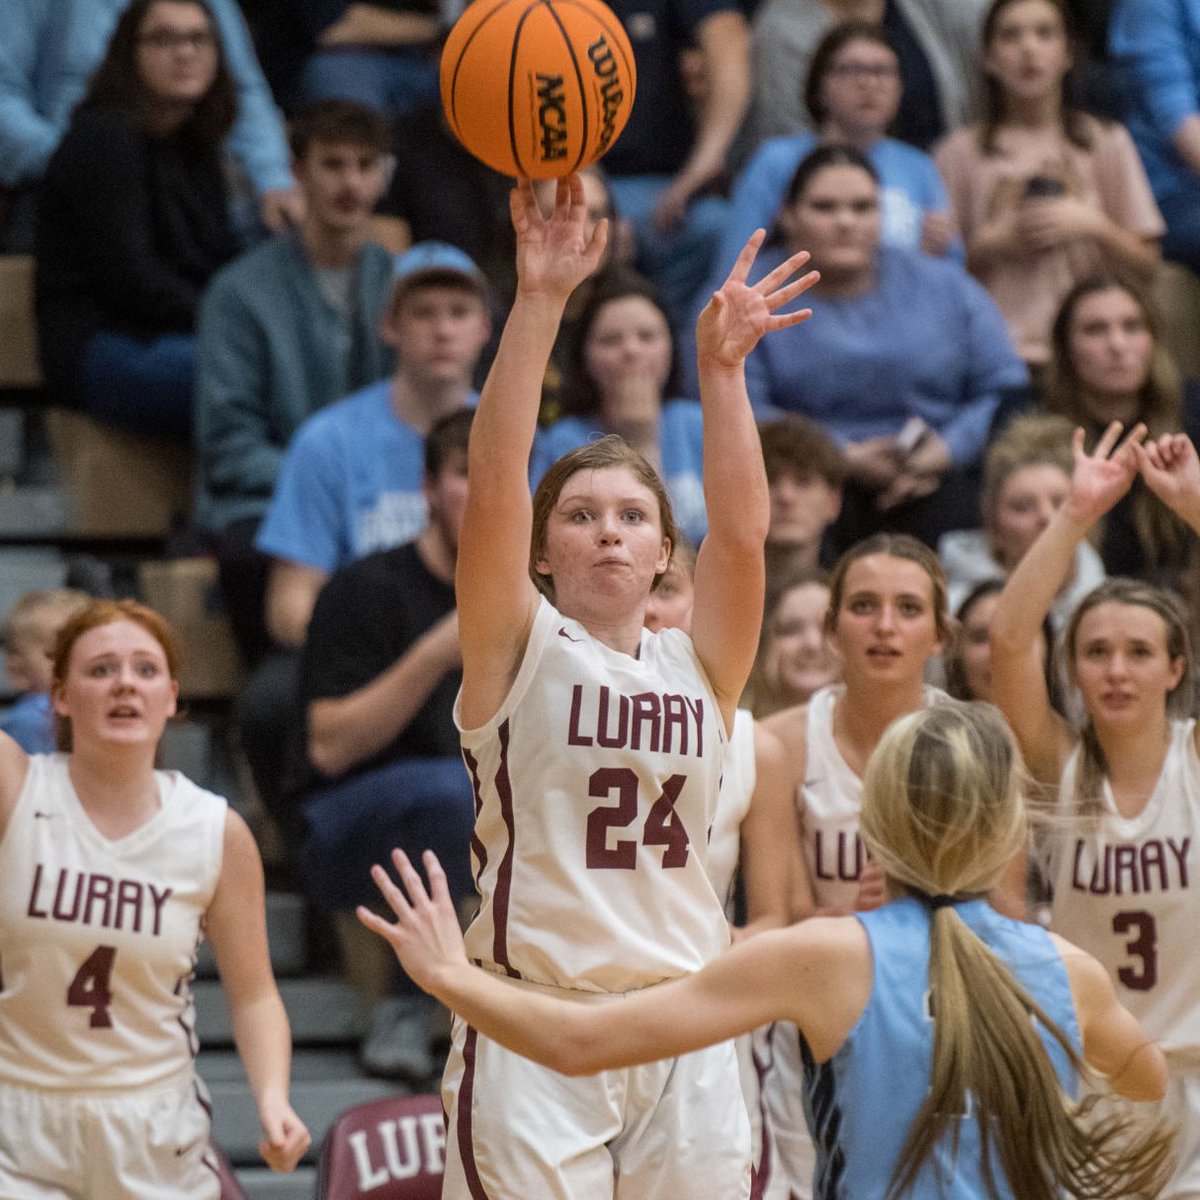 “She’s taken time to learn, to grow, and has been around really good players.” As her decorated four-year career comes to an end, senior guard Emily Donovan leaves a lasting legacy with the Luray girls basketball program (via @John_R_Breeden): dnronline.com/sports/high_sc…